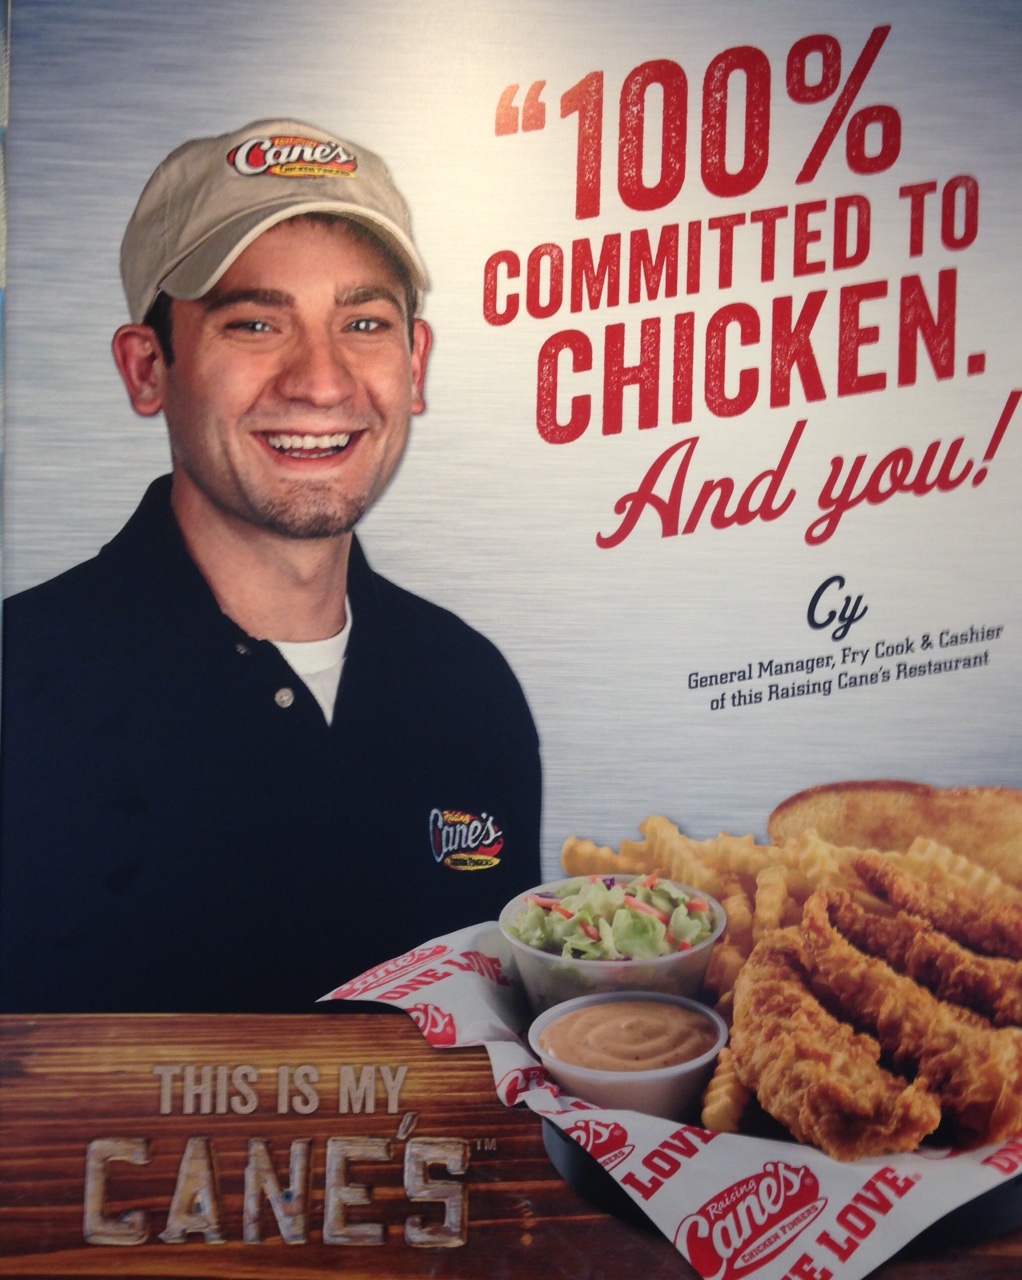 Raising Cane's Beaumont, football party catering Beaumont Tx, tailgate SETX